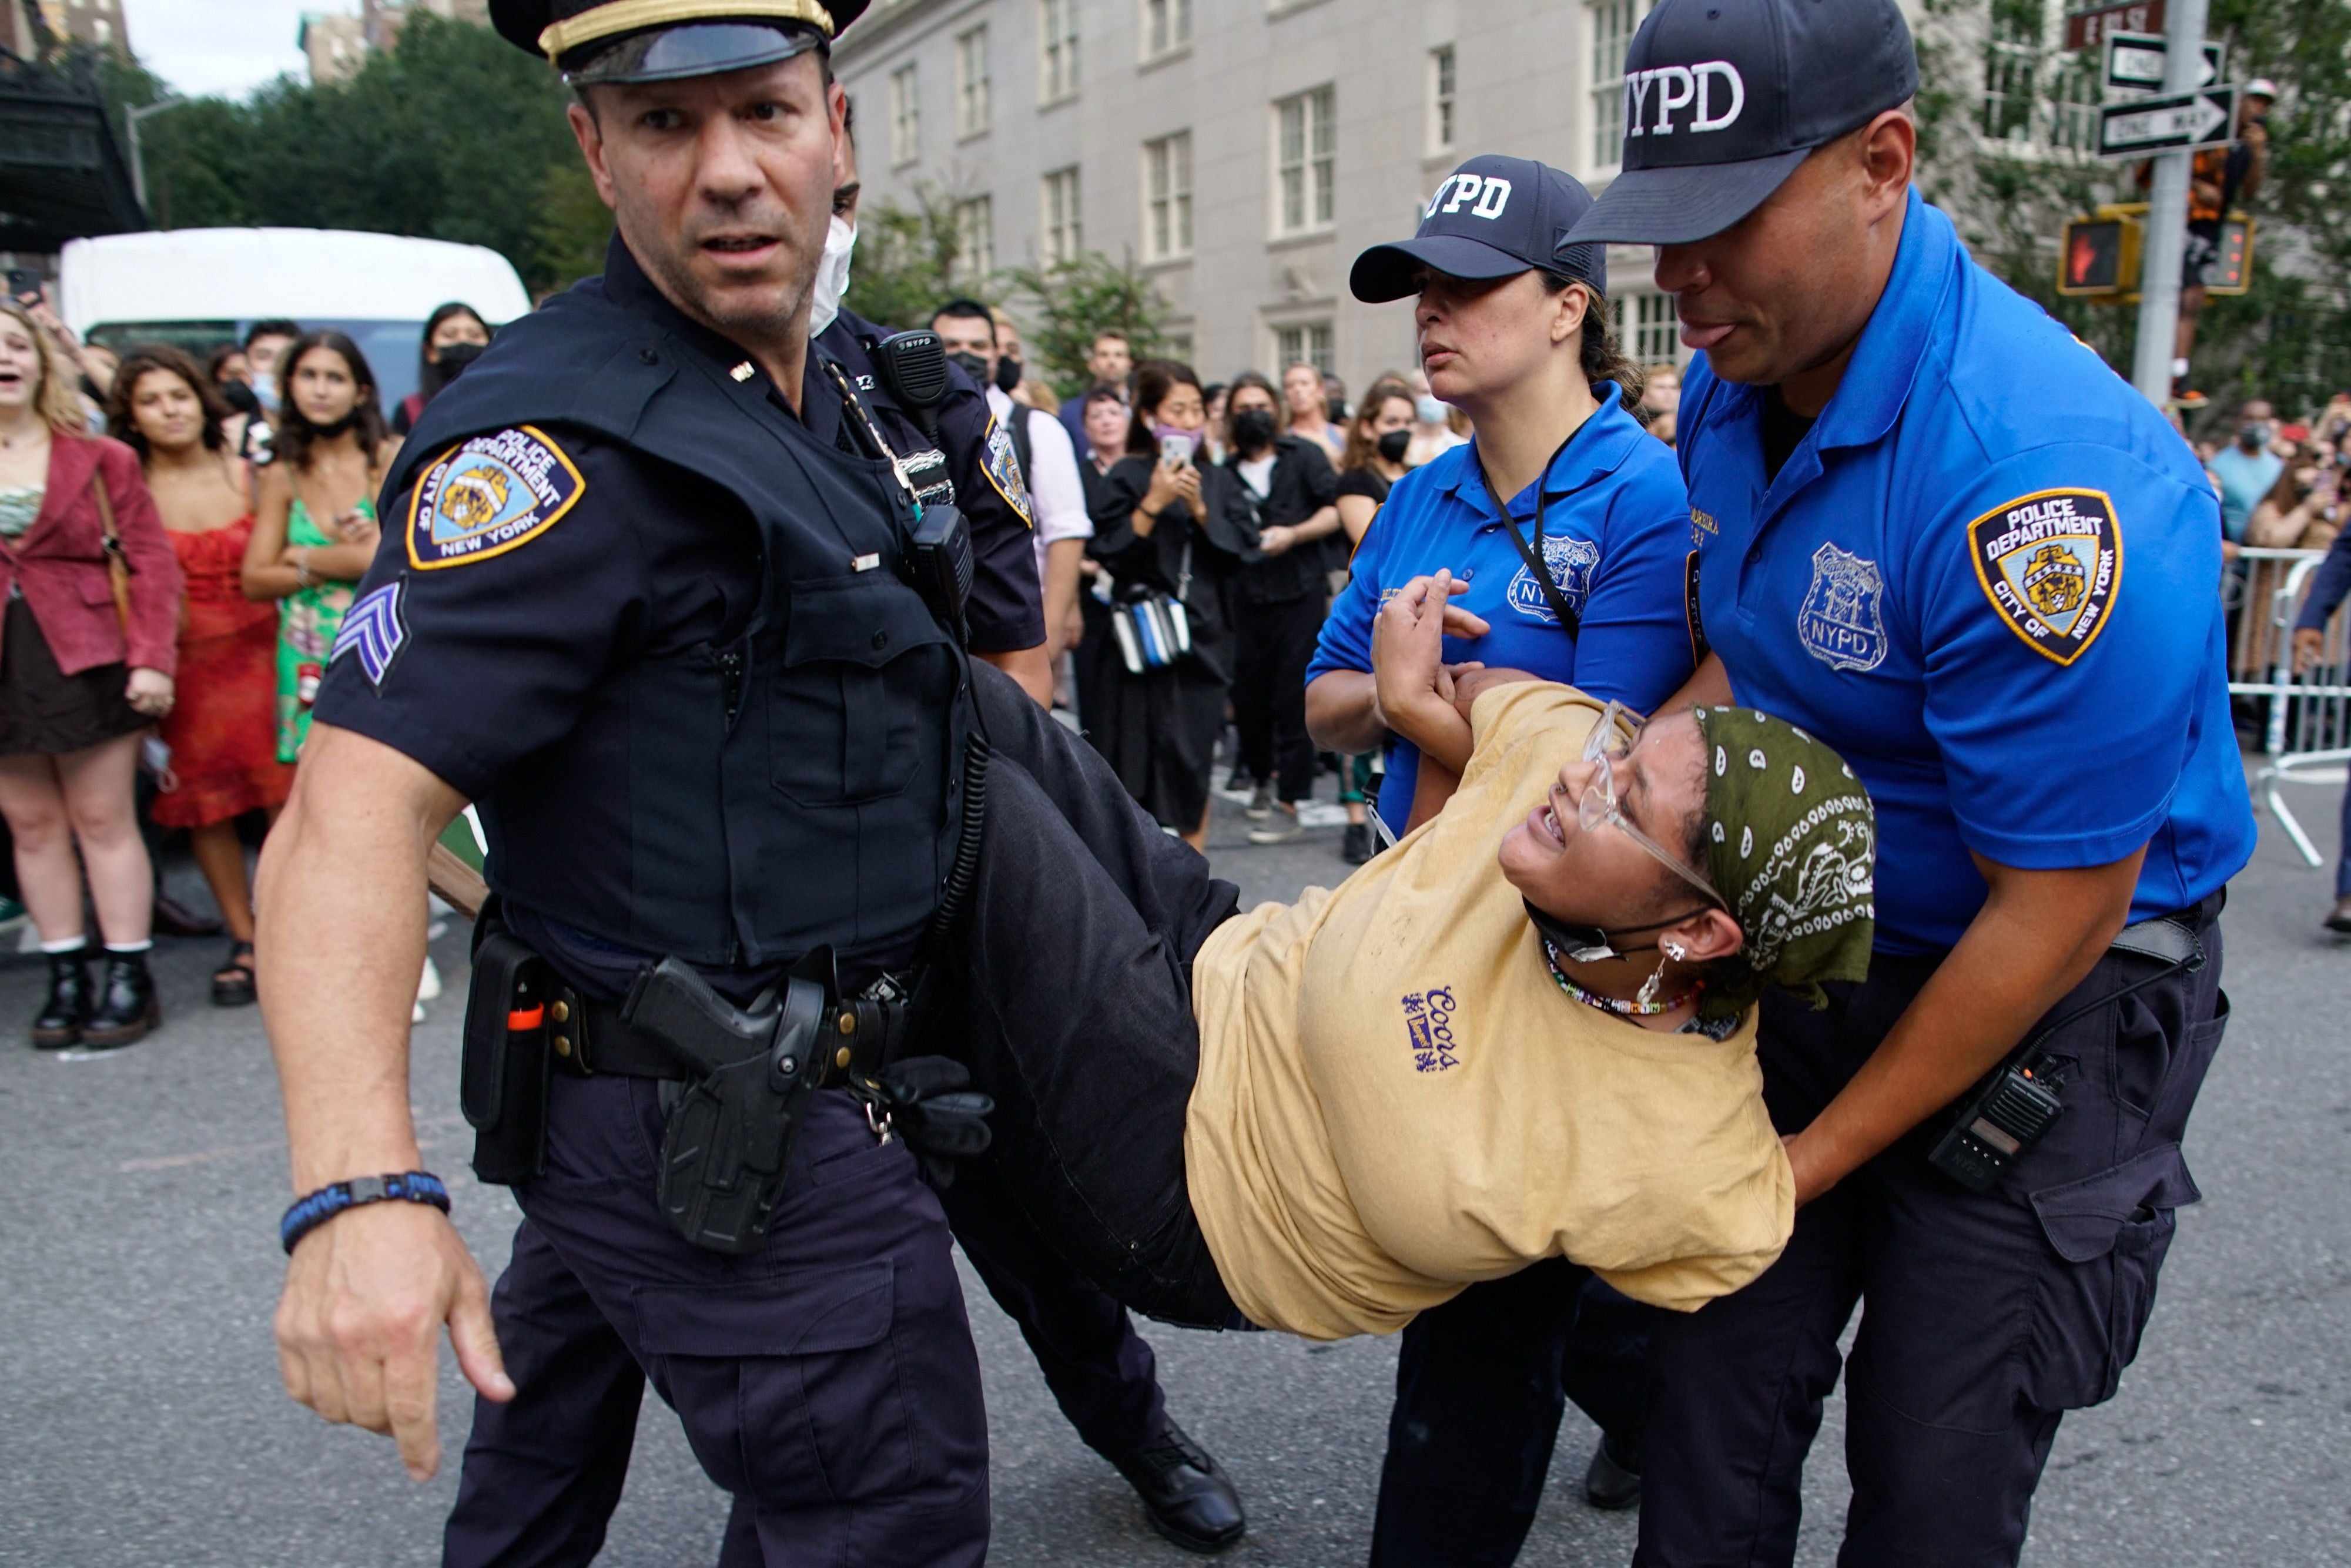 Protestor seen being carried away after demonstration in front of Met Gala